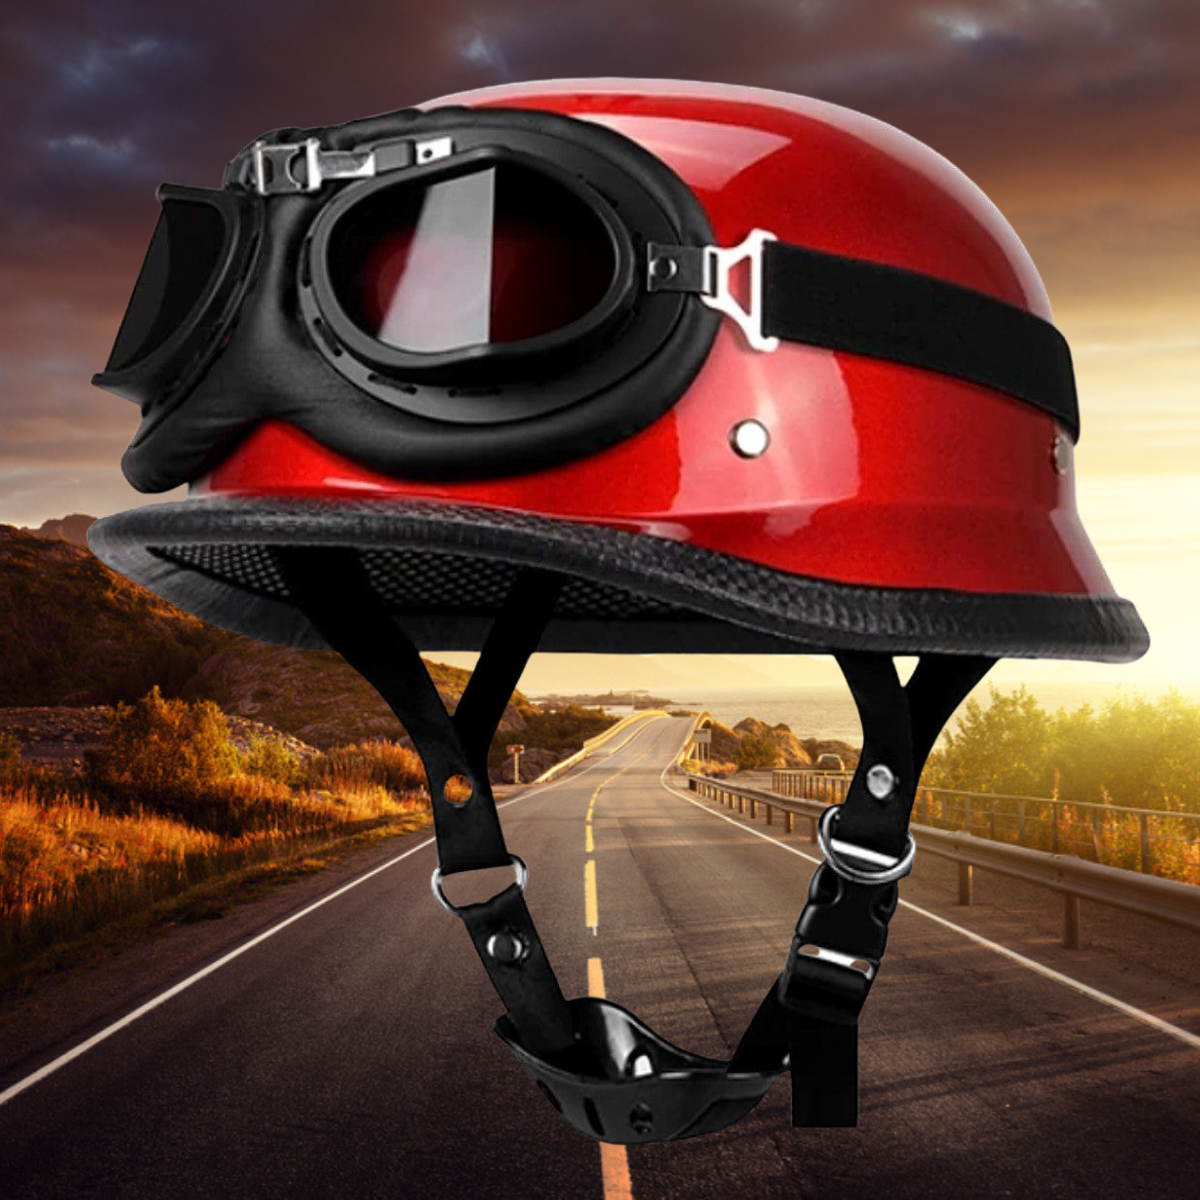 A high-quality Glossy Red German Motorcycle Helmet with goggles on the road.